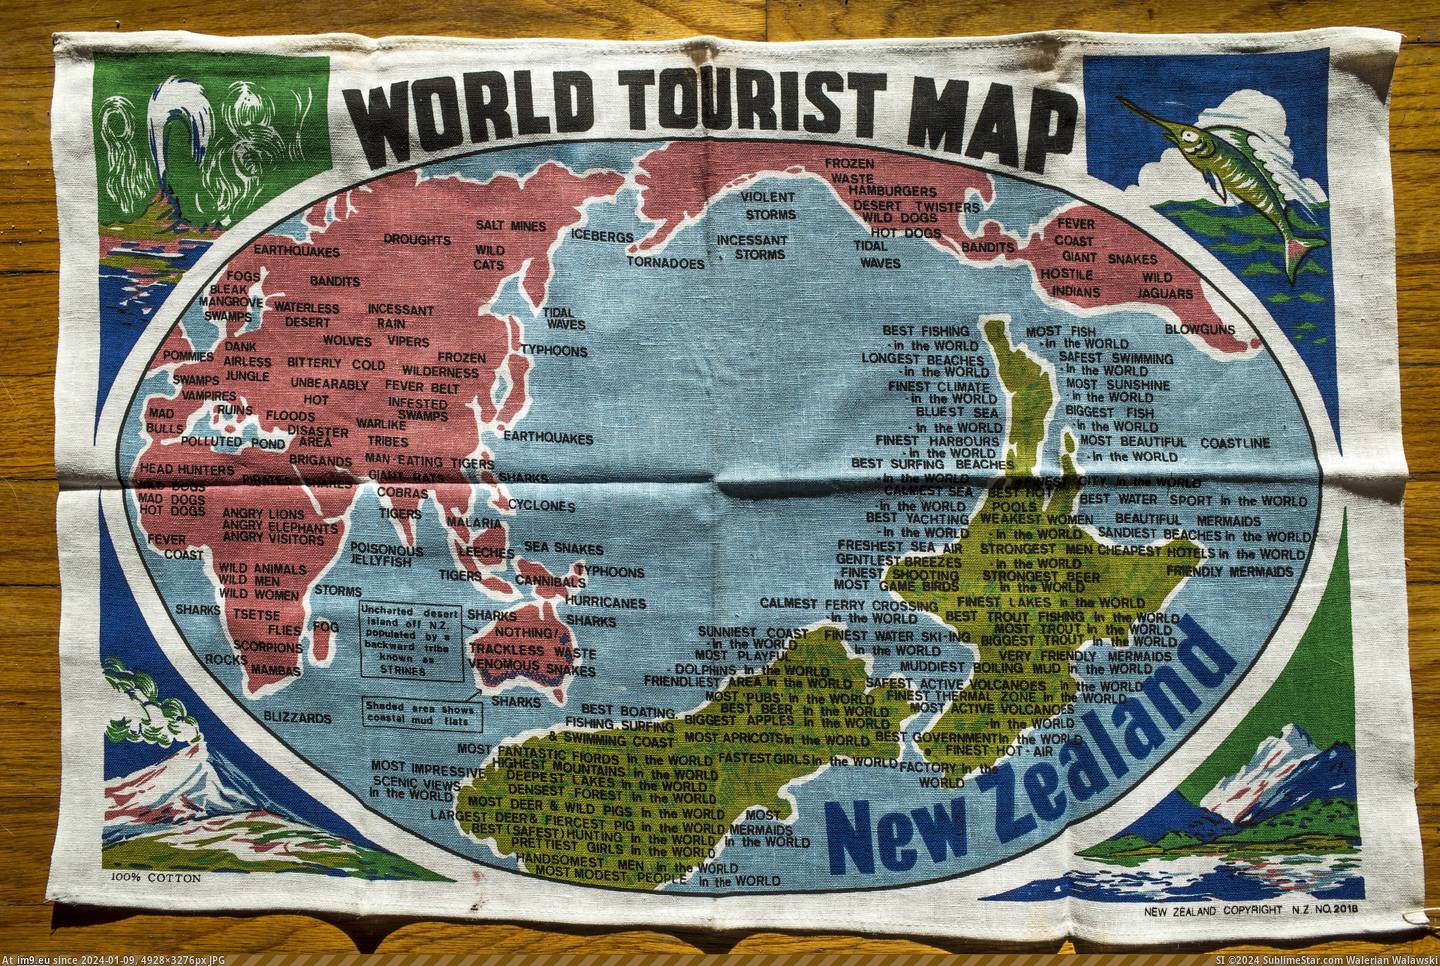 #World #Map #4928x3264 #Zealand #Perspective [Mapporn] World Tourism Map, New Zealand's perspective [4928x3264] Pic. (Изображение из альбом My r/MAPS favs))